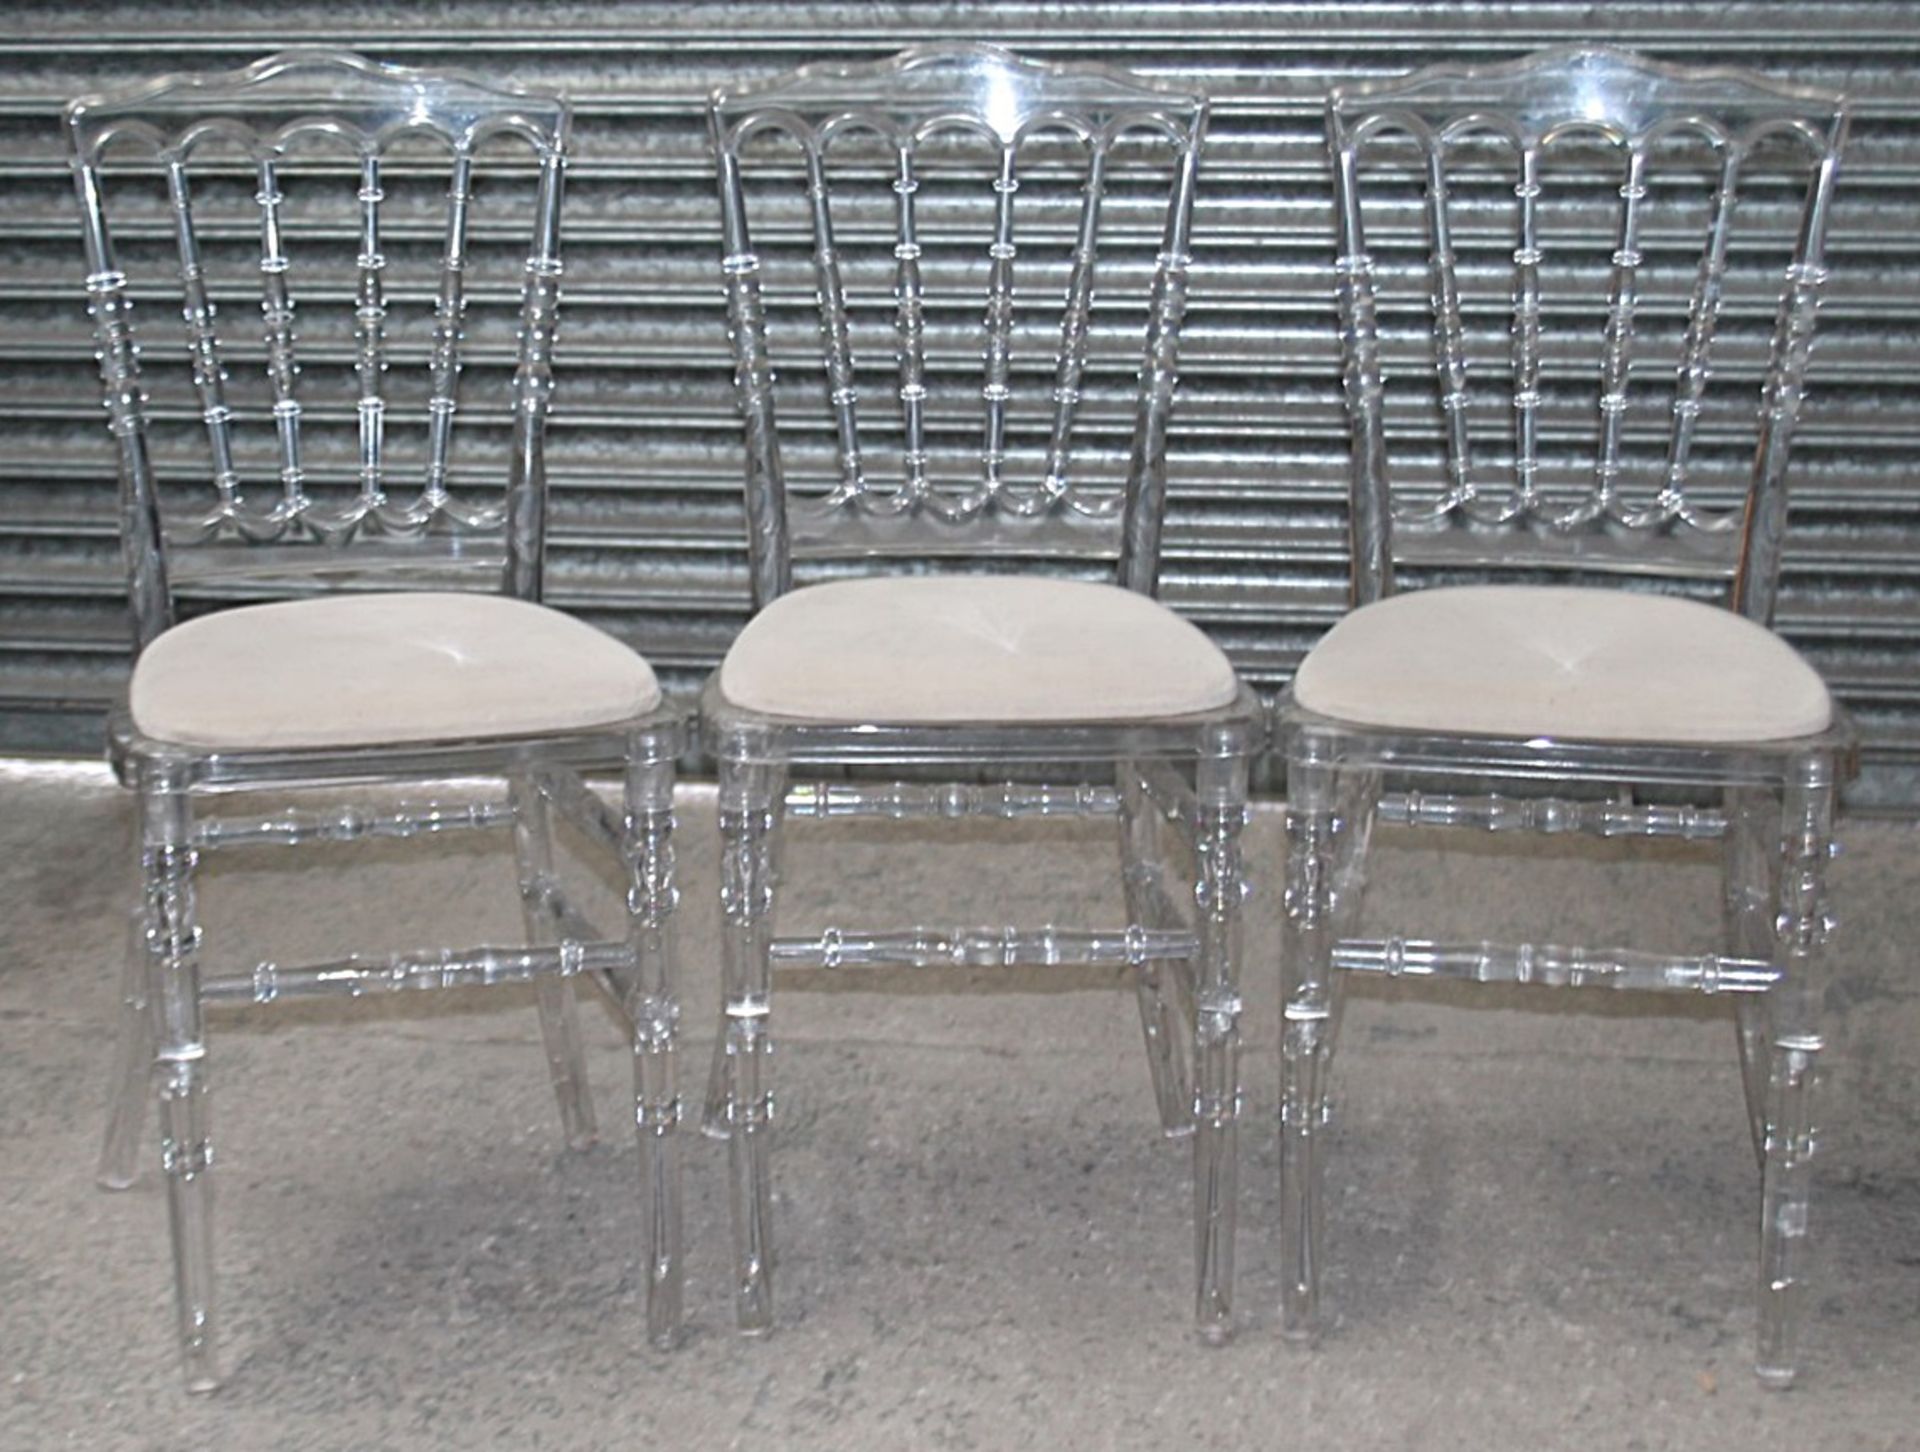 10 x Clear Acrylic Spindle Back Dining Chairs With Removable Seat Pads - Ref: HAS678A - CL011 / G-IT - Image 4 of 10